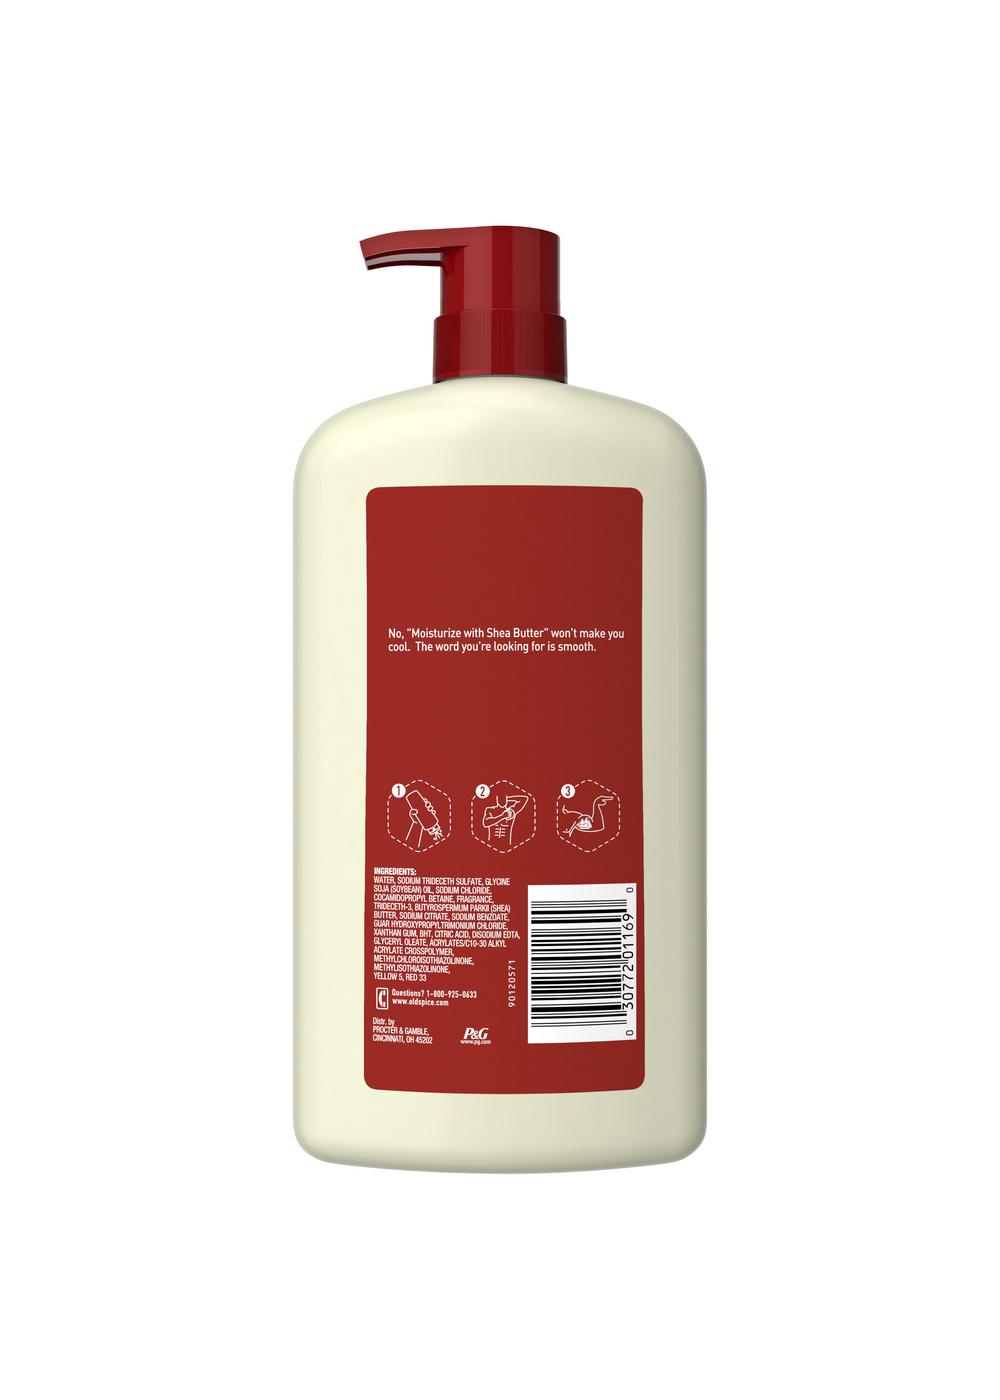 Old Spice Body Wash - Moisturize + Shea Butter; image 4 of 5